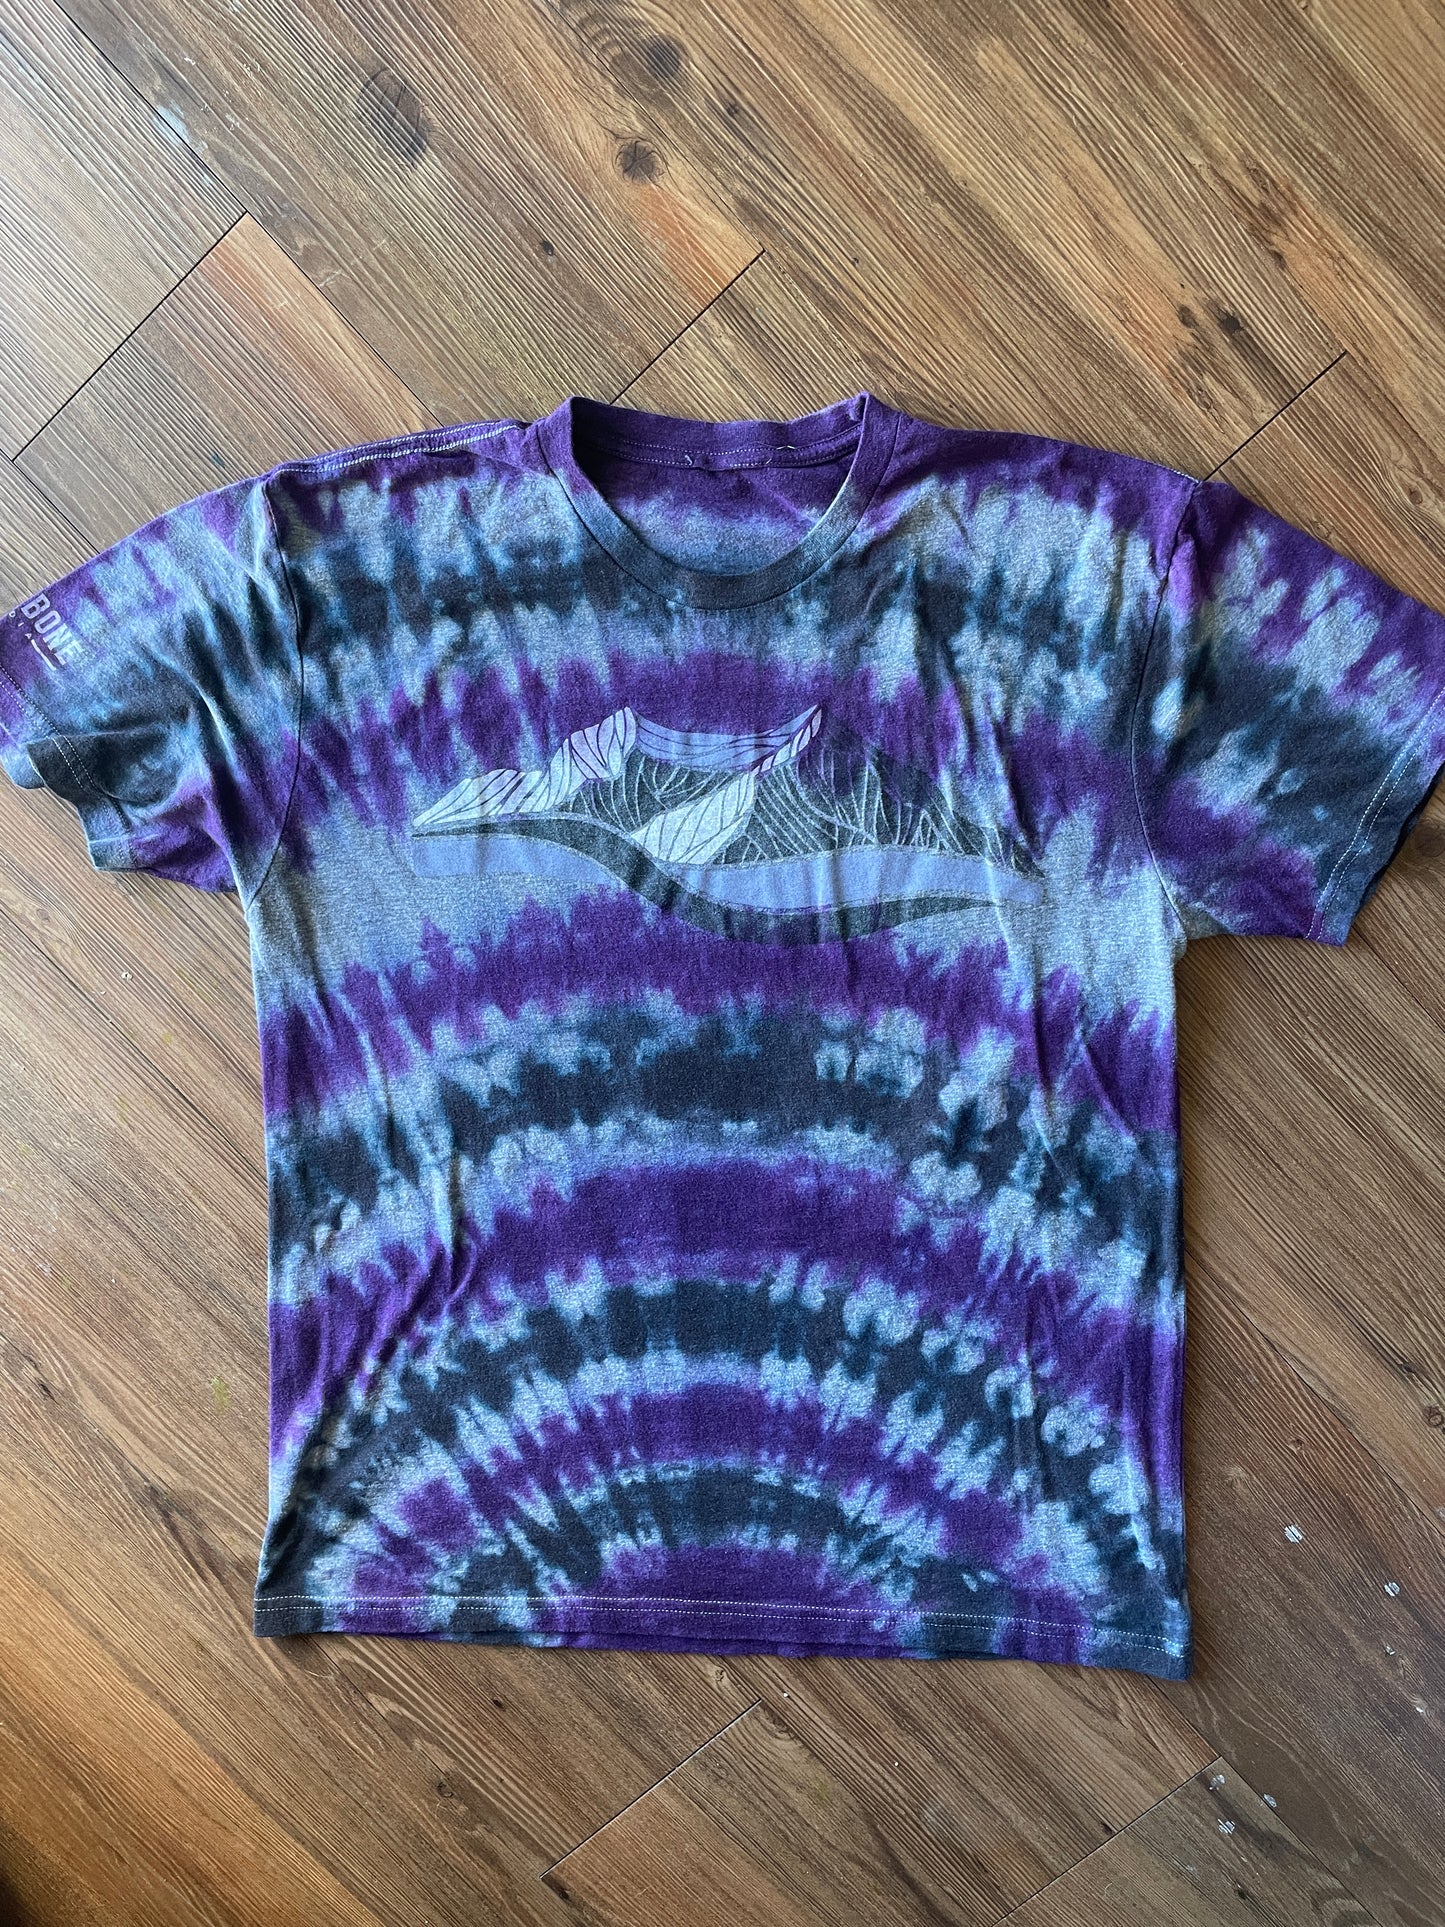 LARGE Men’s Purple Mountain Majesty Handmade Tie Dye T-Shirt | One-Of-a-Kind Purple, Gray, and Black Short Sleeve